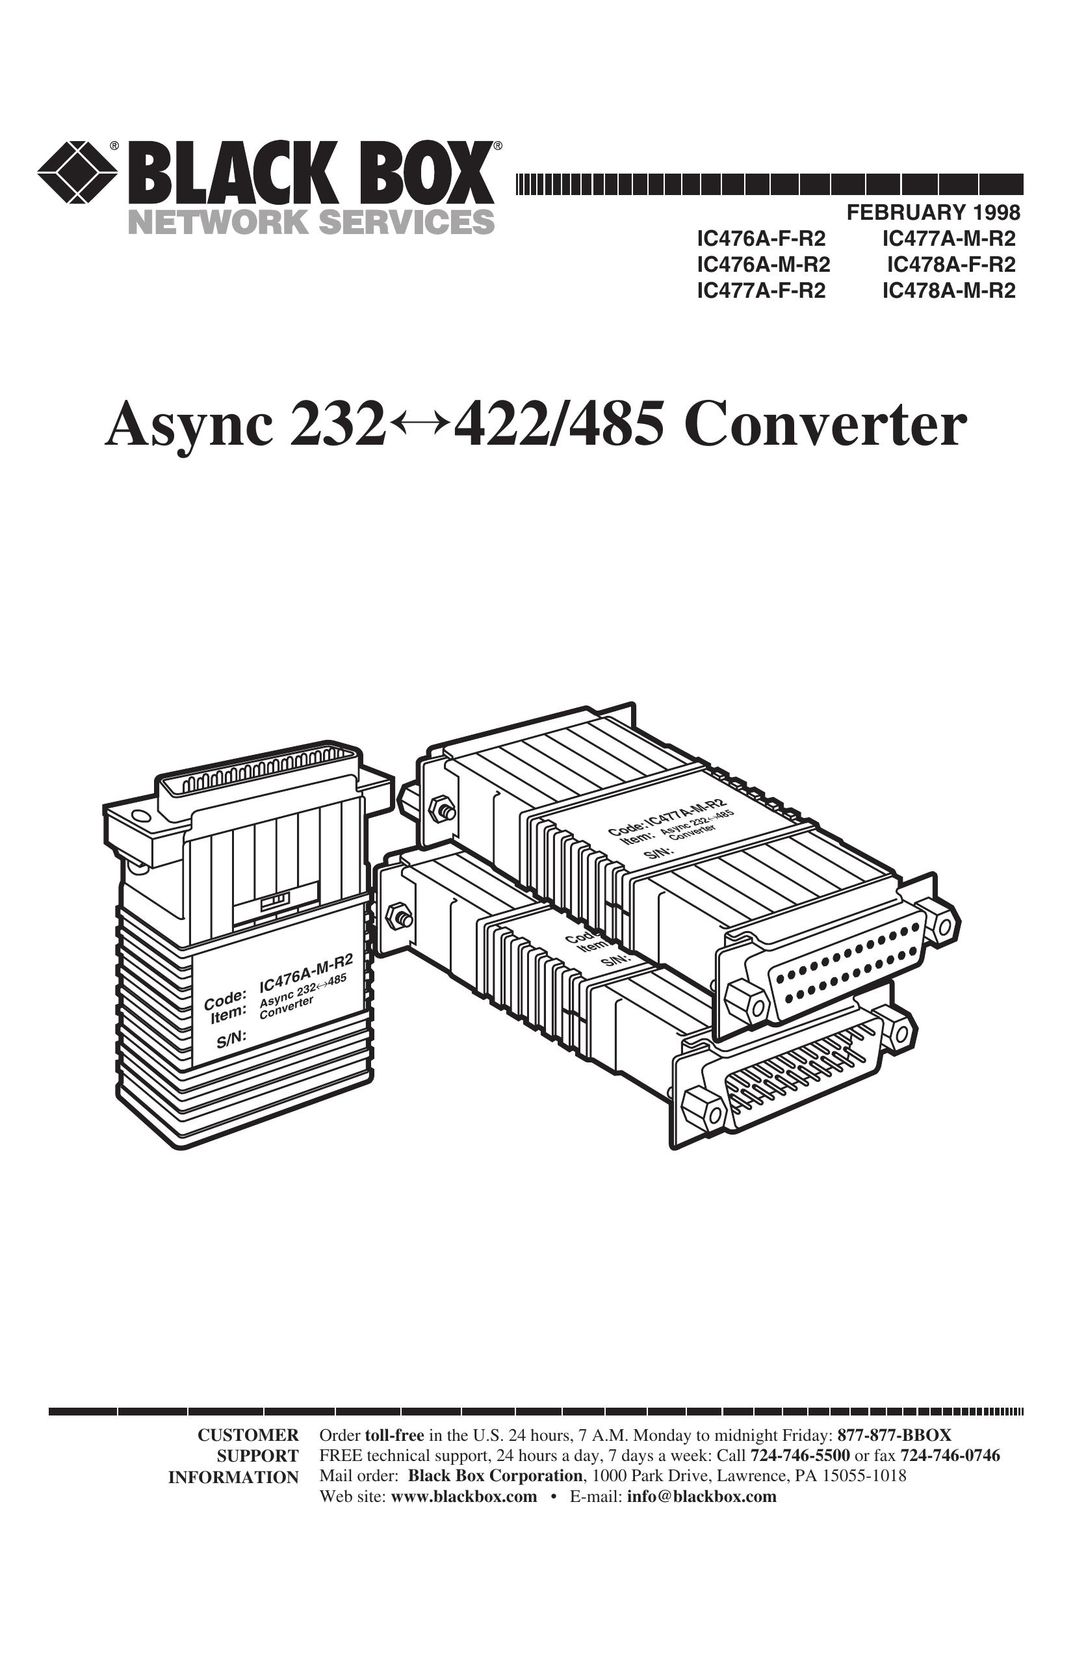 Black Box IC476A-M-R2 Network Router User Manual